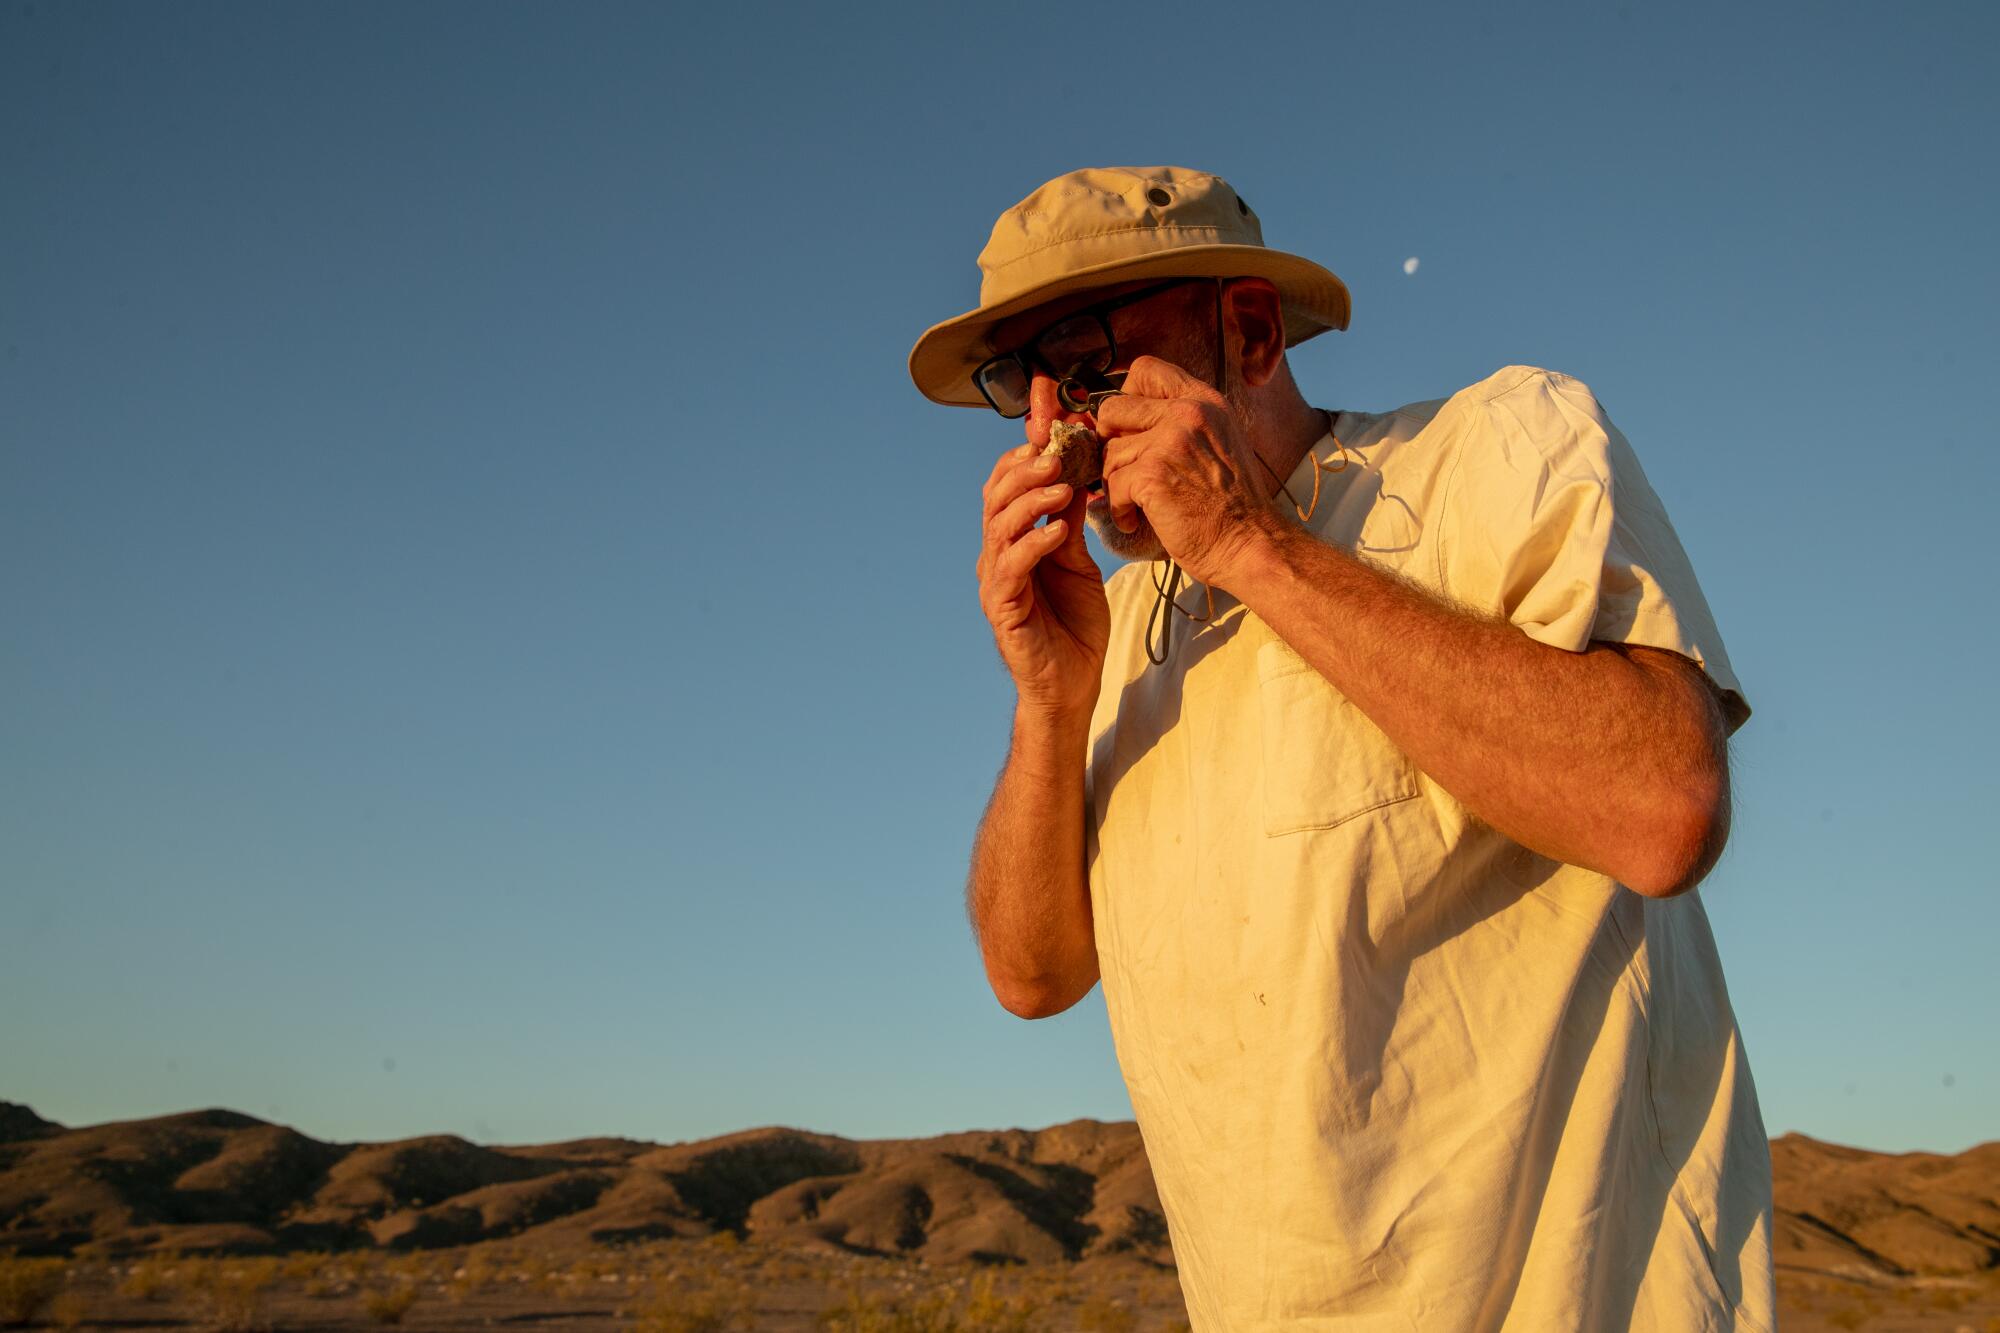 A man uses a magnifying glass to examine a rock in the desert.